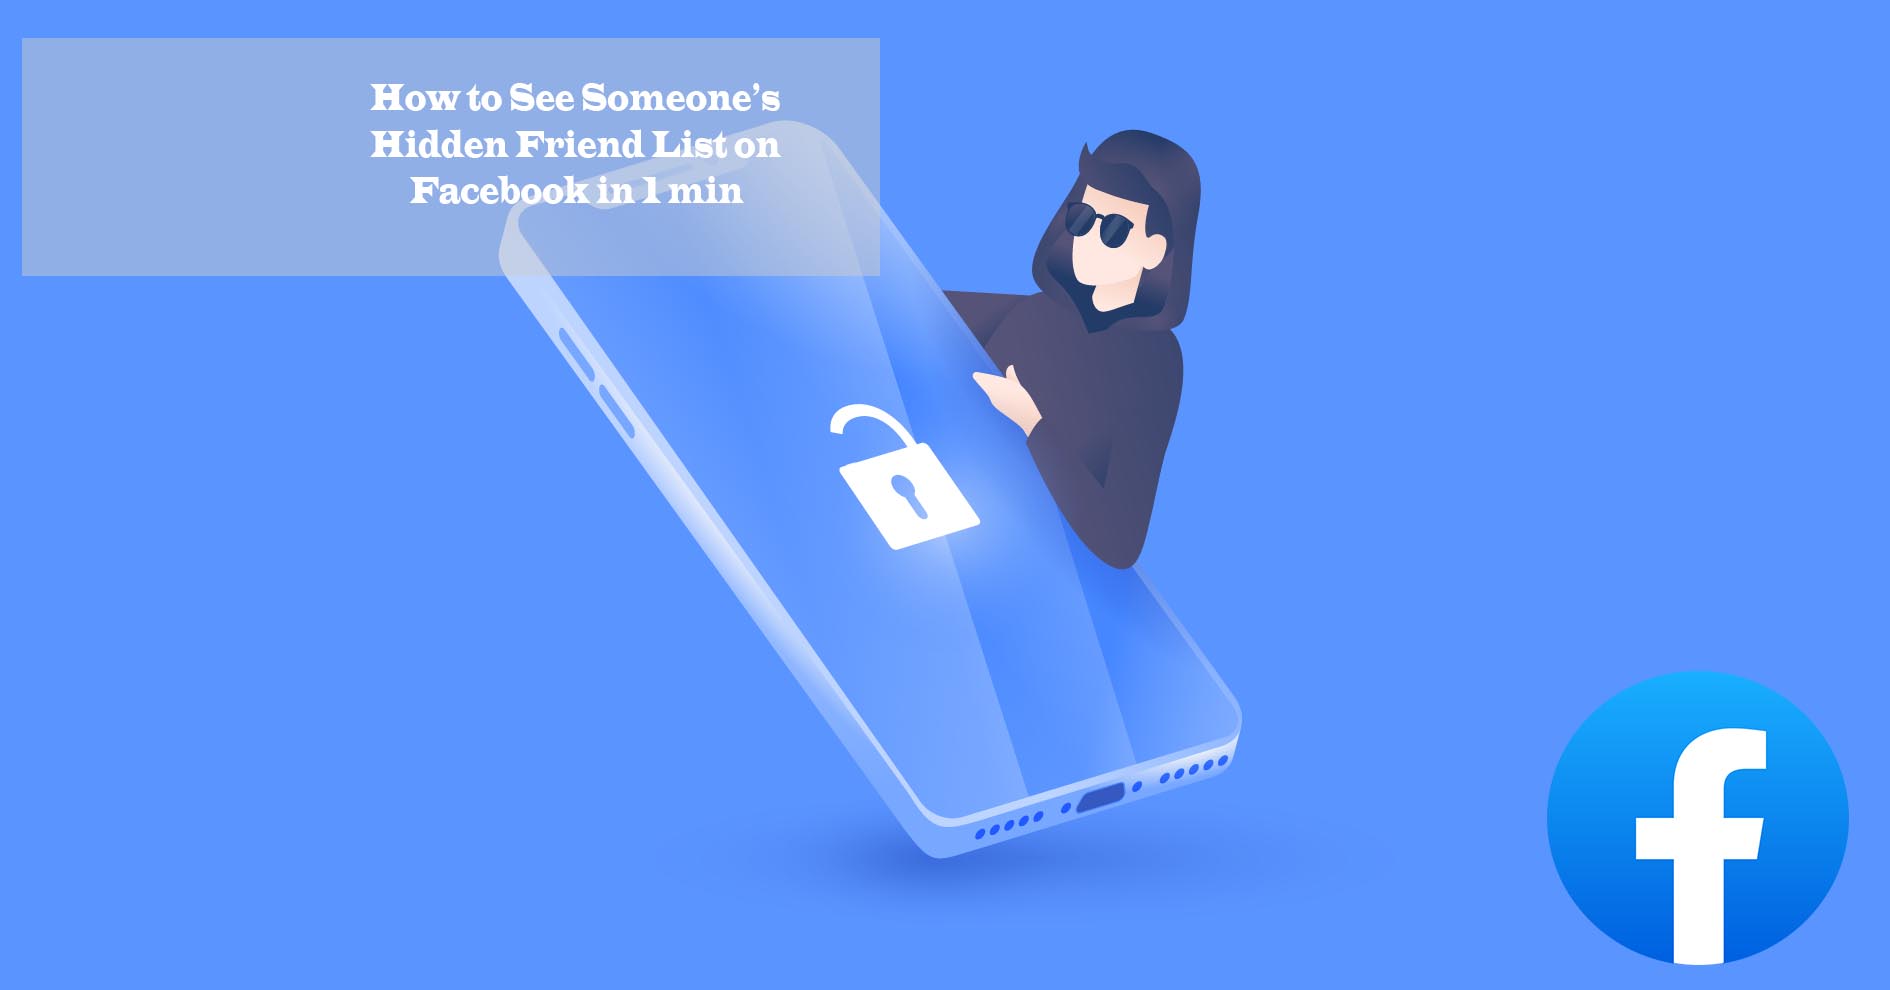 How to See Someone’s Hidden Friend List on Facebook in 1 min